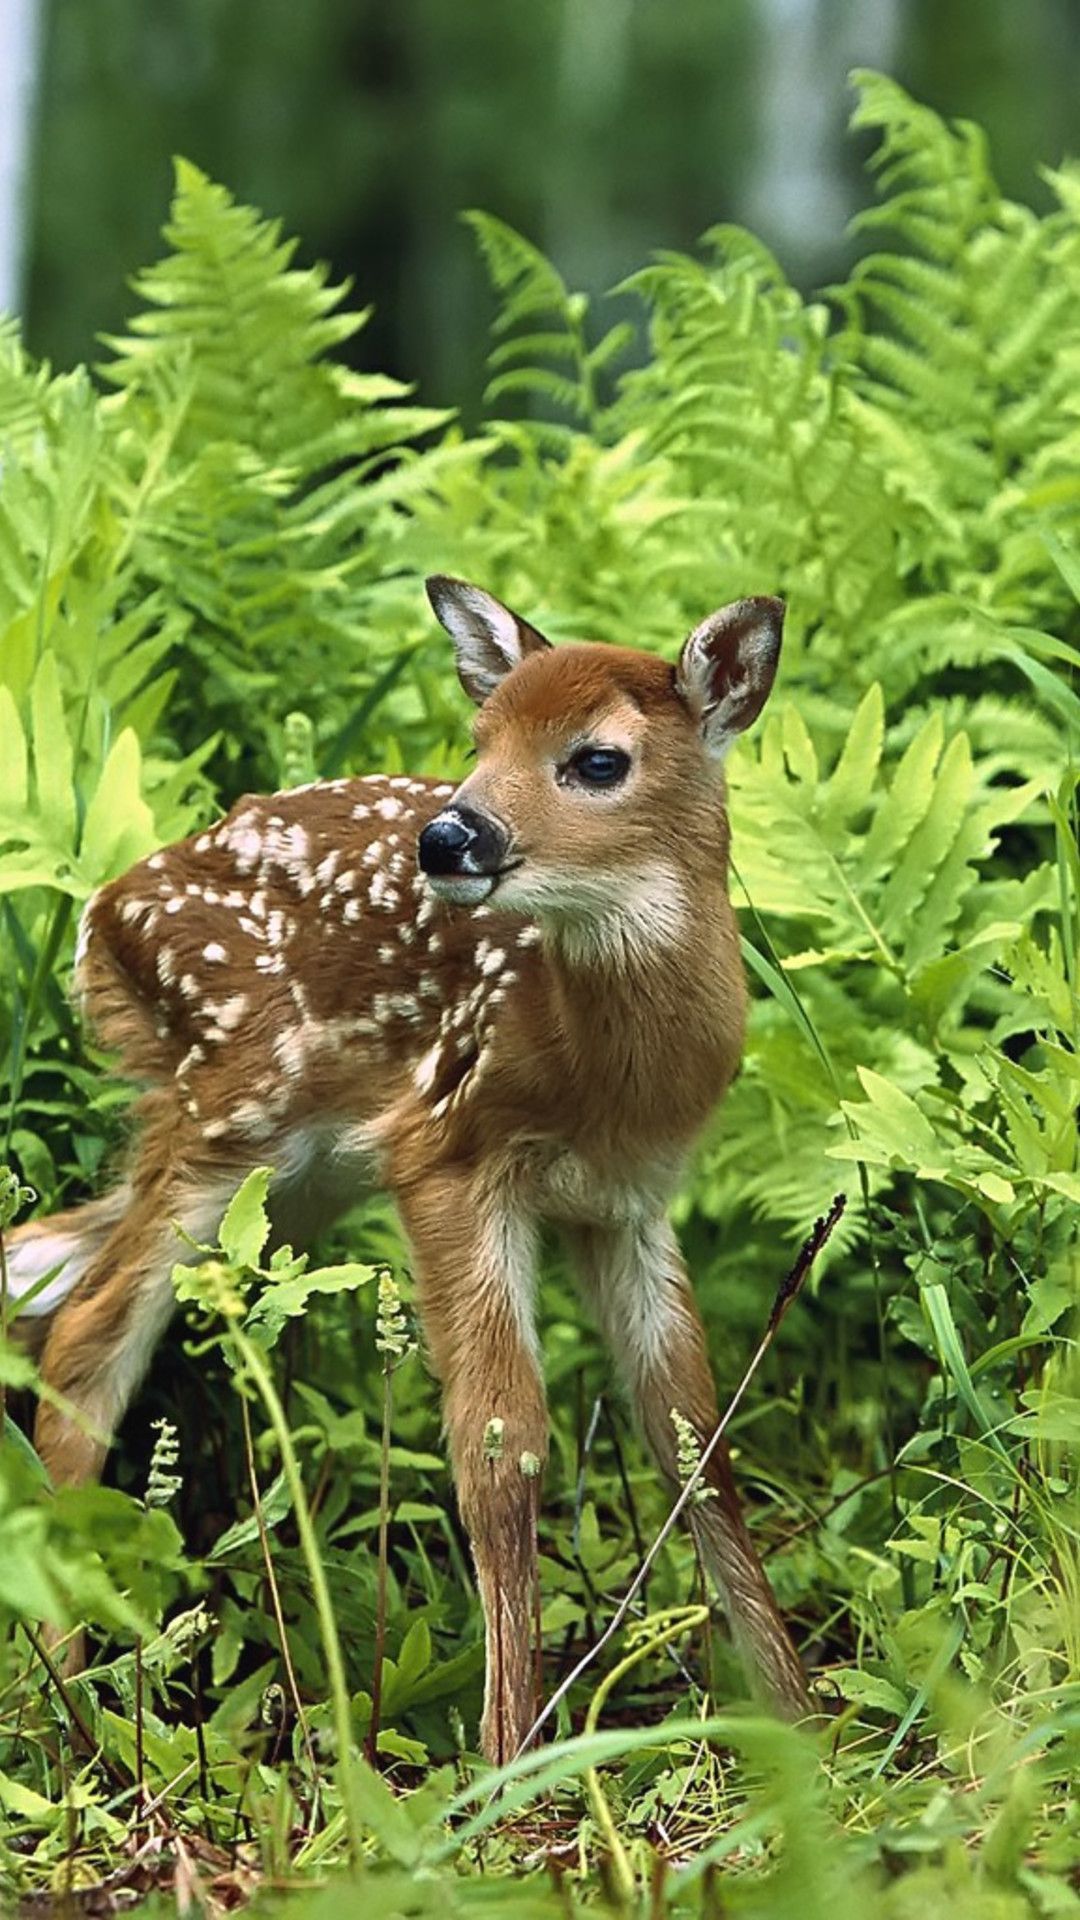 Wallpaper Download 1080x1920 A sweet baby deer in the grass in forest. Wild animals wallpaper. Animals Wallpape. Wild animal wallpaper, Animals, Animal wallpaper